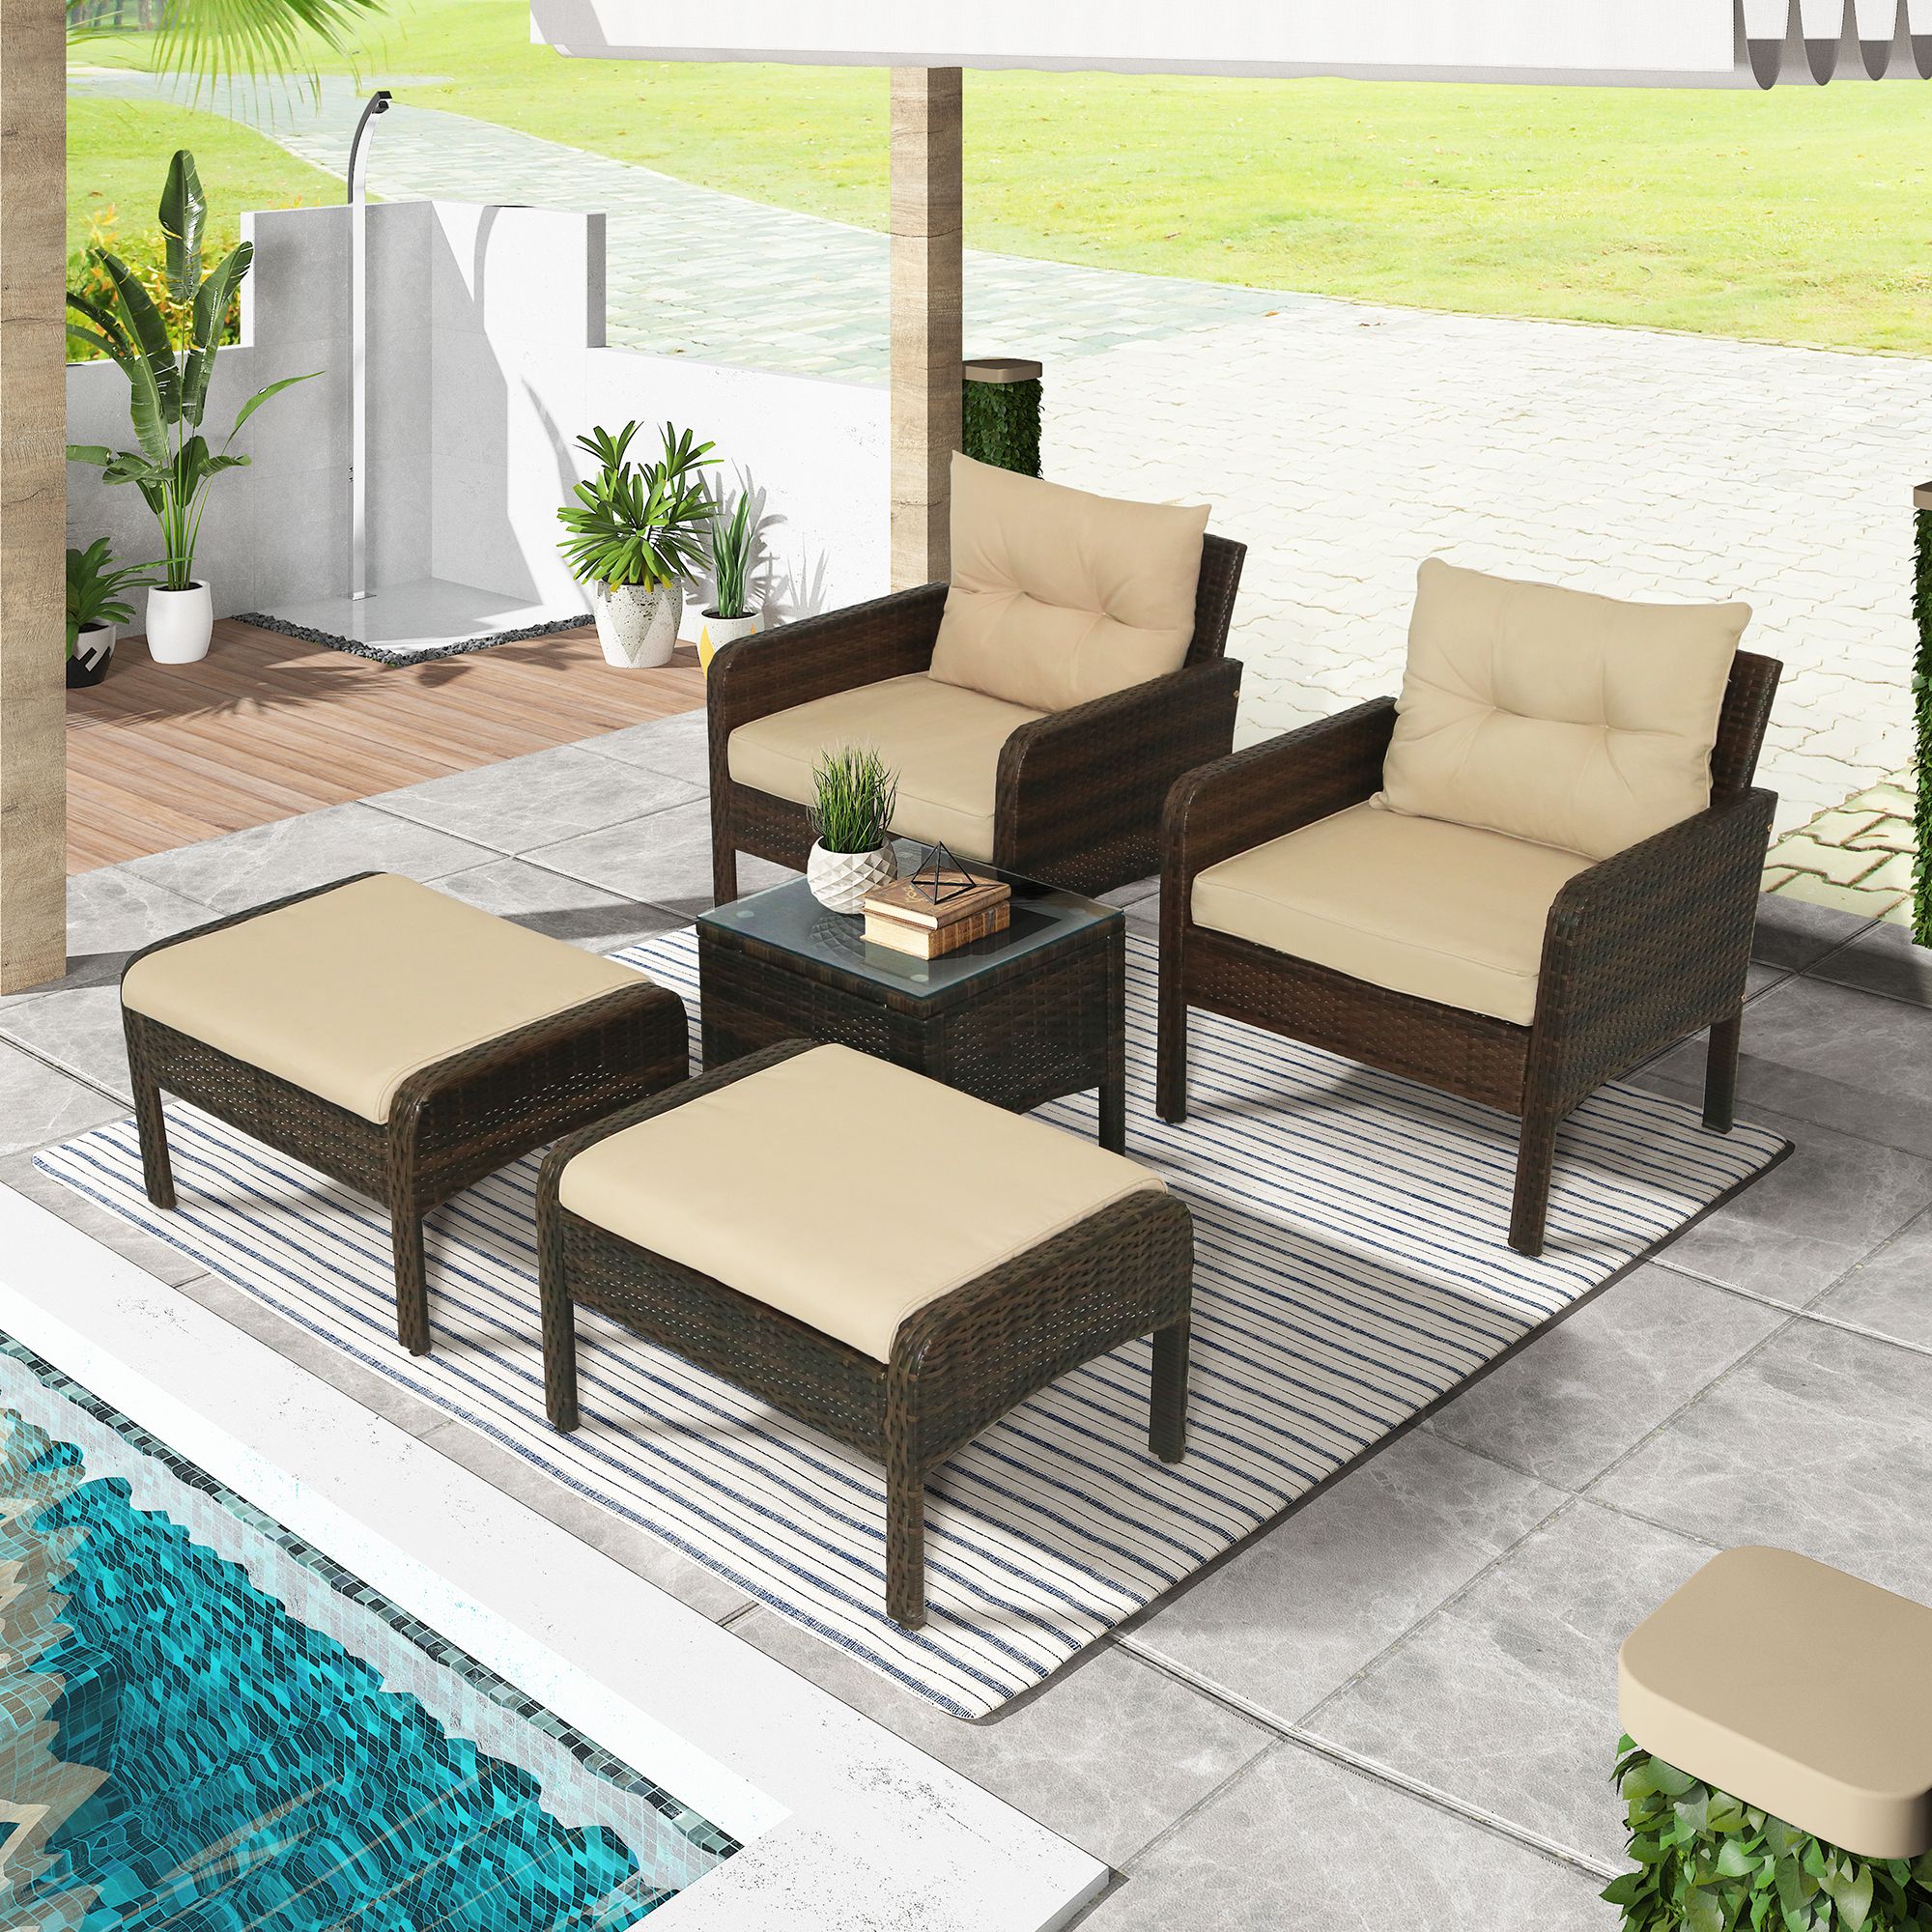 Widely Used Outdoor Seating Sectional Patio Sets Pertaining To Clearance! Outdoor Sectional Patio Conversation Set, Segmart 5 Piece (View 3 of 15)